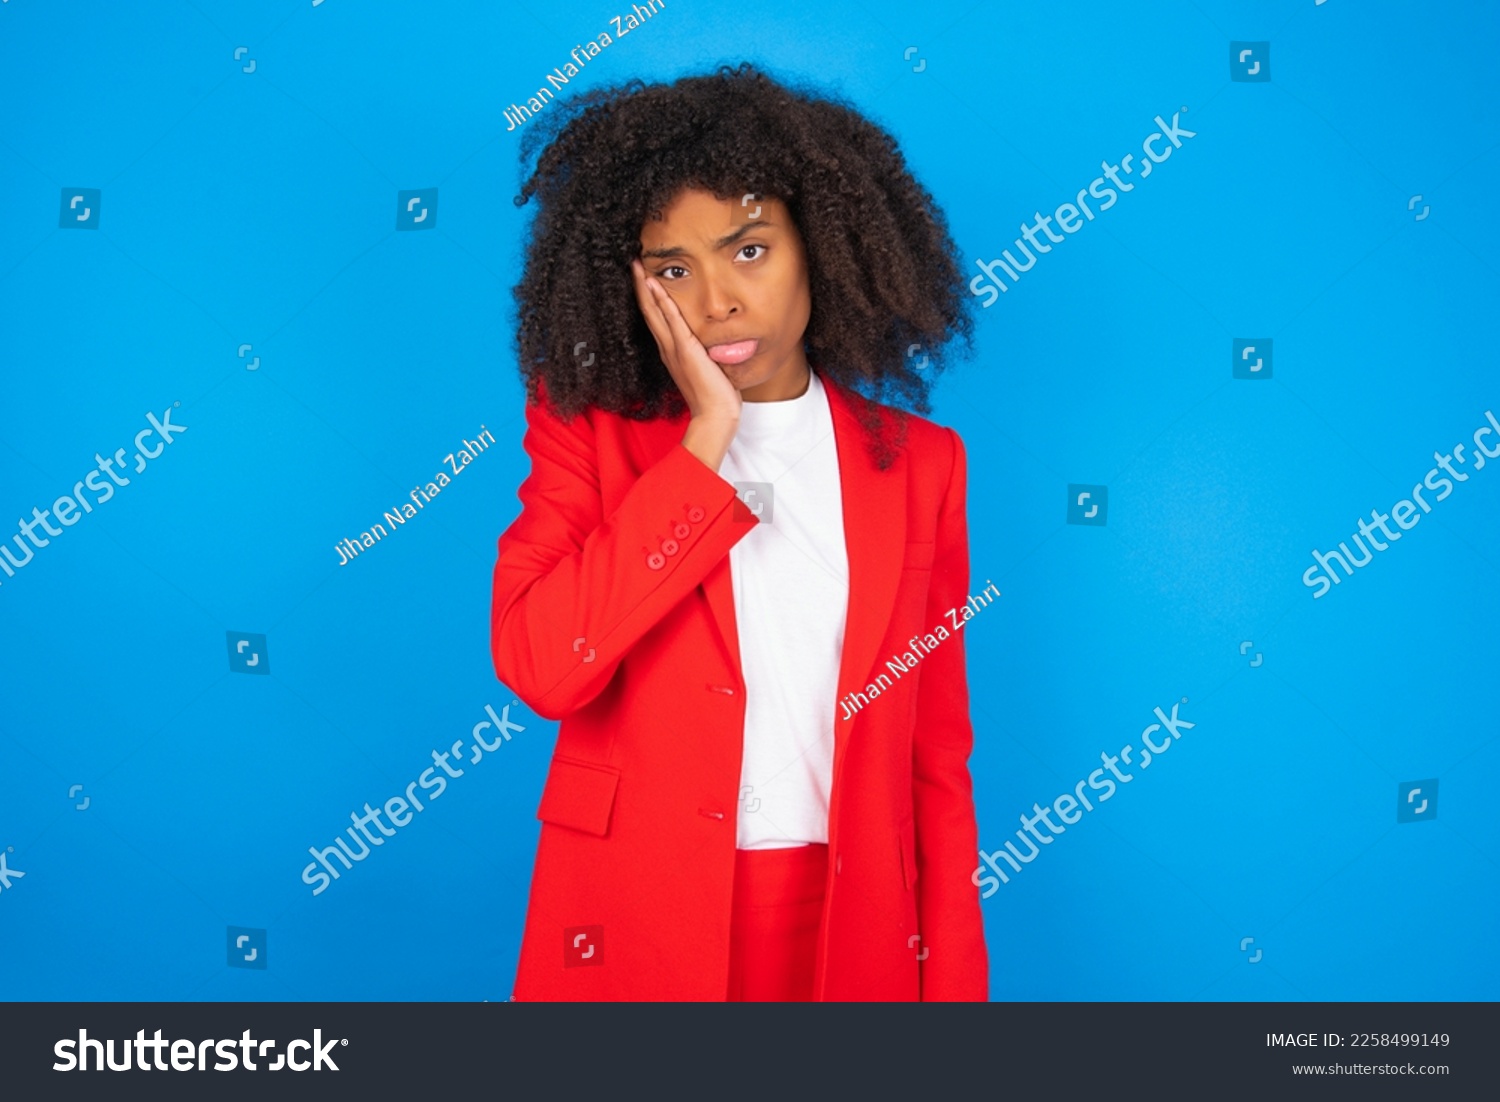 Sad lonely young businesswoman with afro hairstyle wearing red over blue background touches cheek with hand bites lower lip and gazes with displeasure. Bad emotions #2258499149